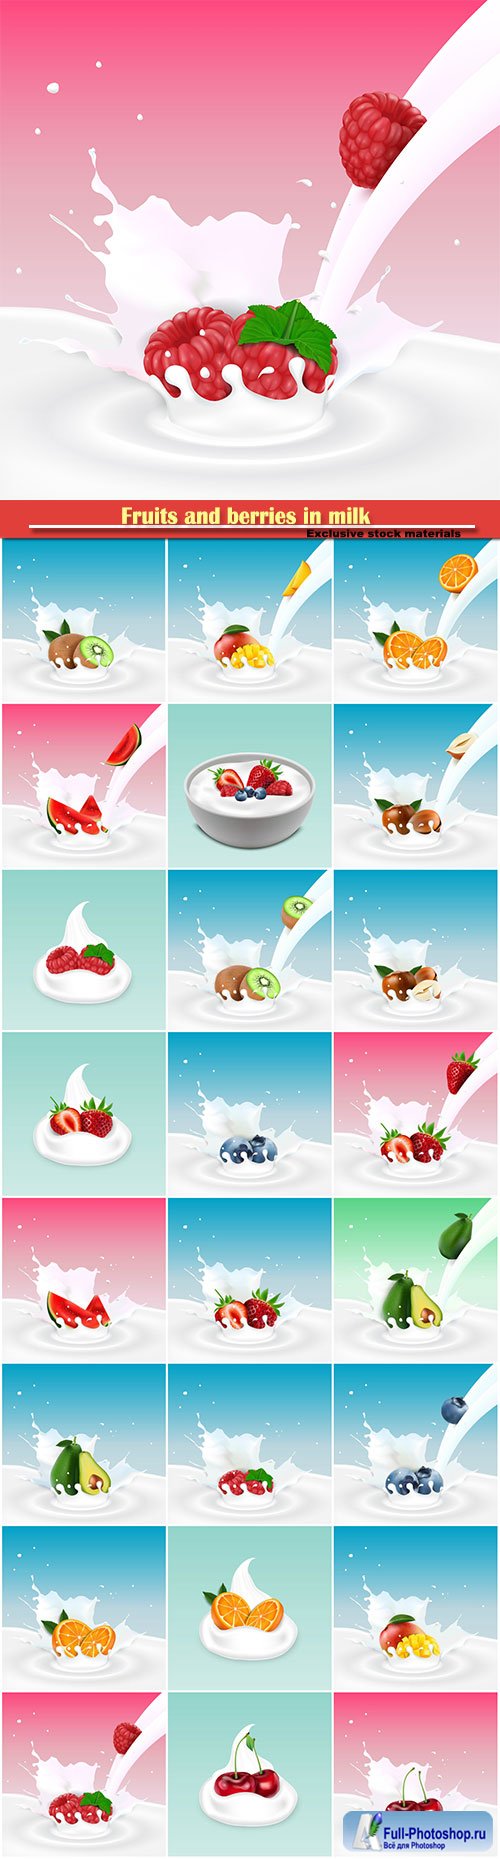 Fruits and berries in milk, vector illustration